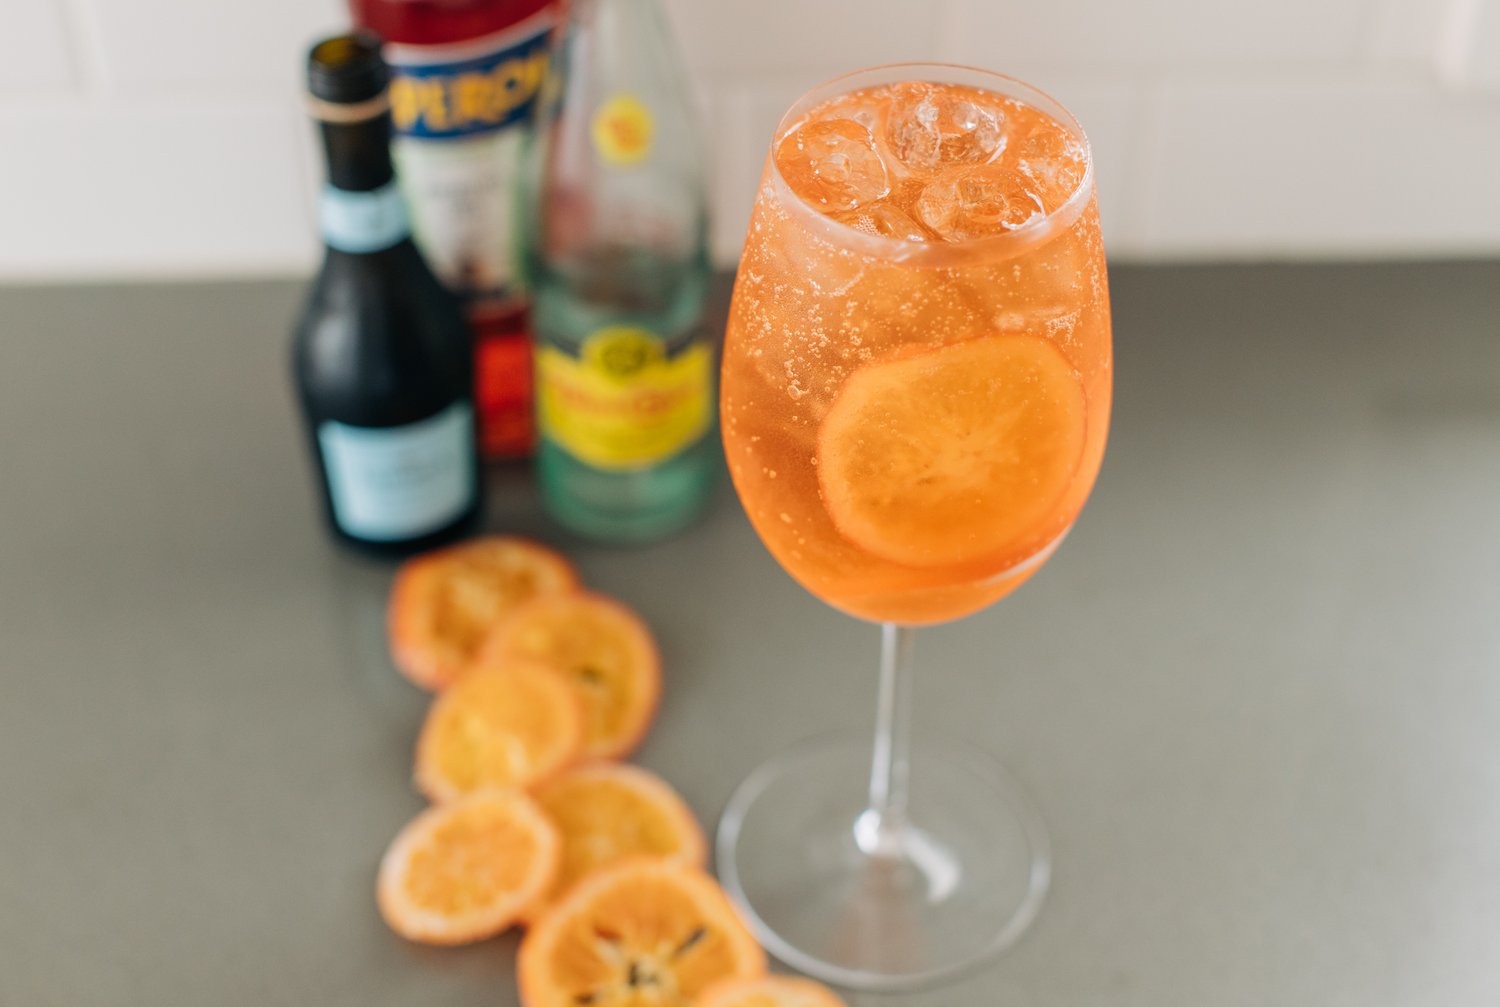 This Aperol Spritz Recipe Is Our 3-Ingredient Drink of Summer